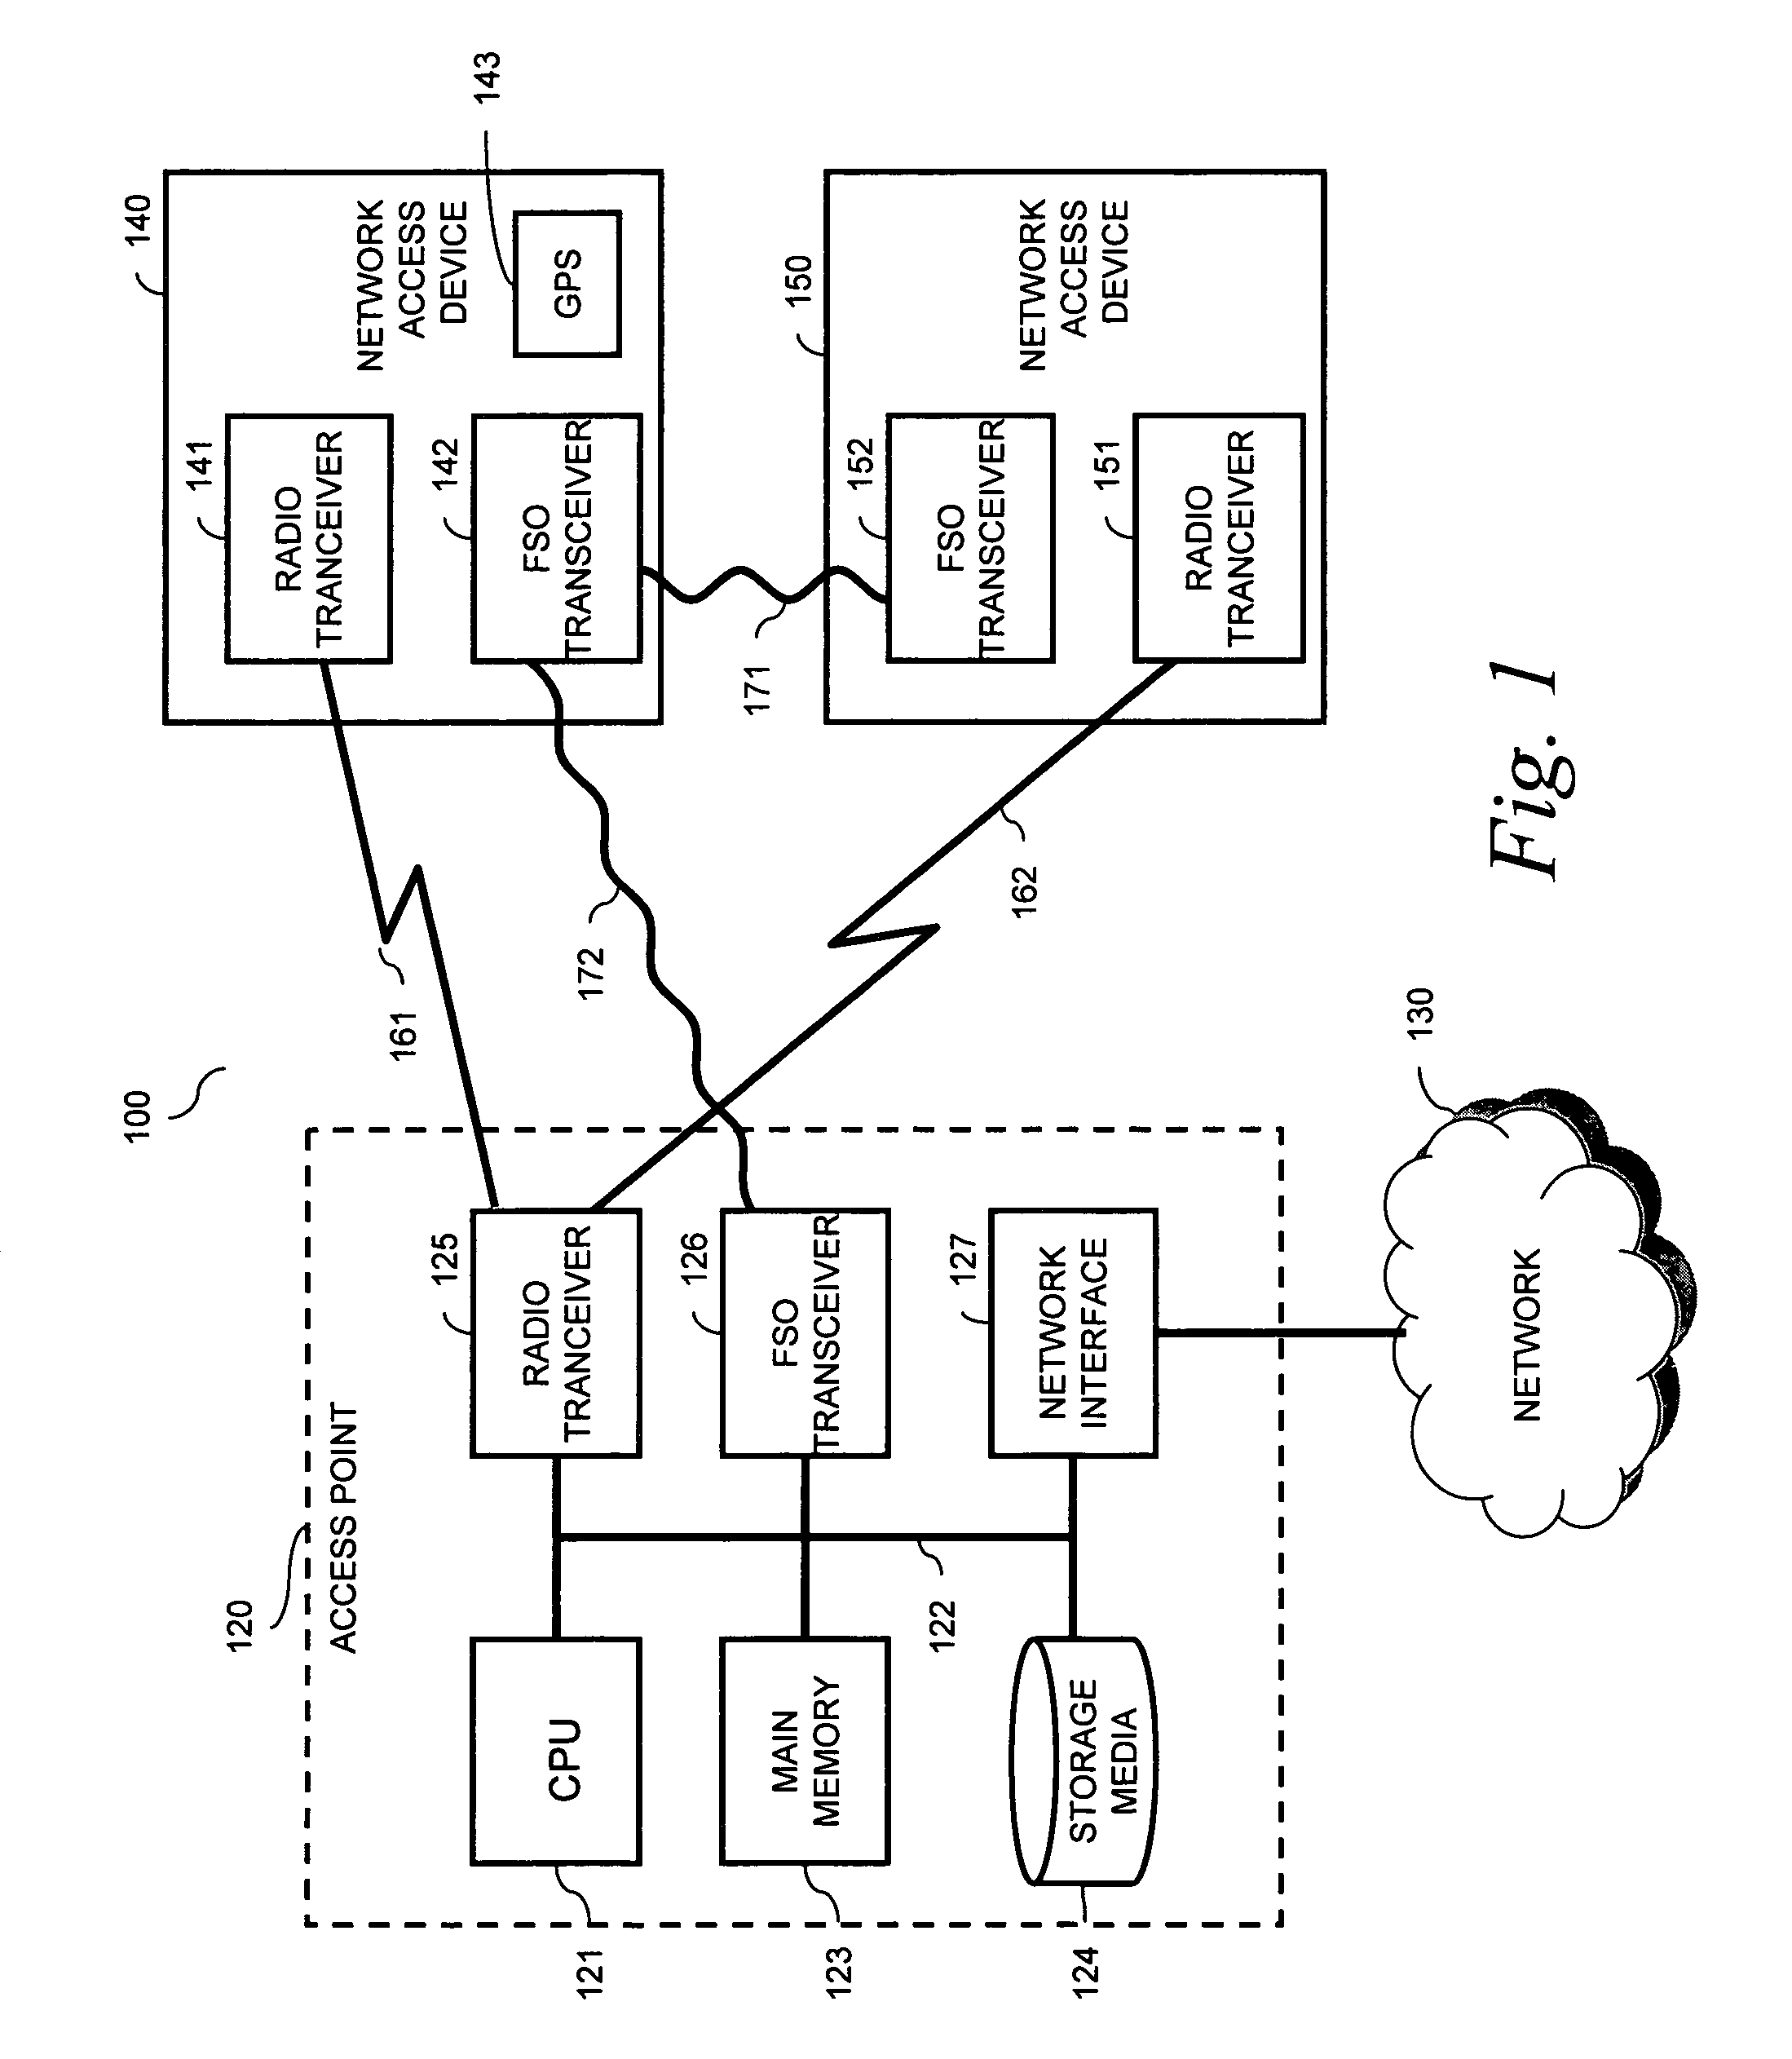 Enterprise cognitive radio integrated with laser communications